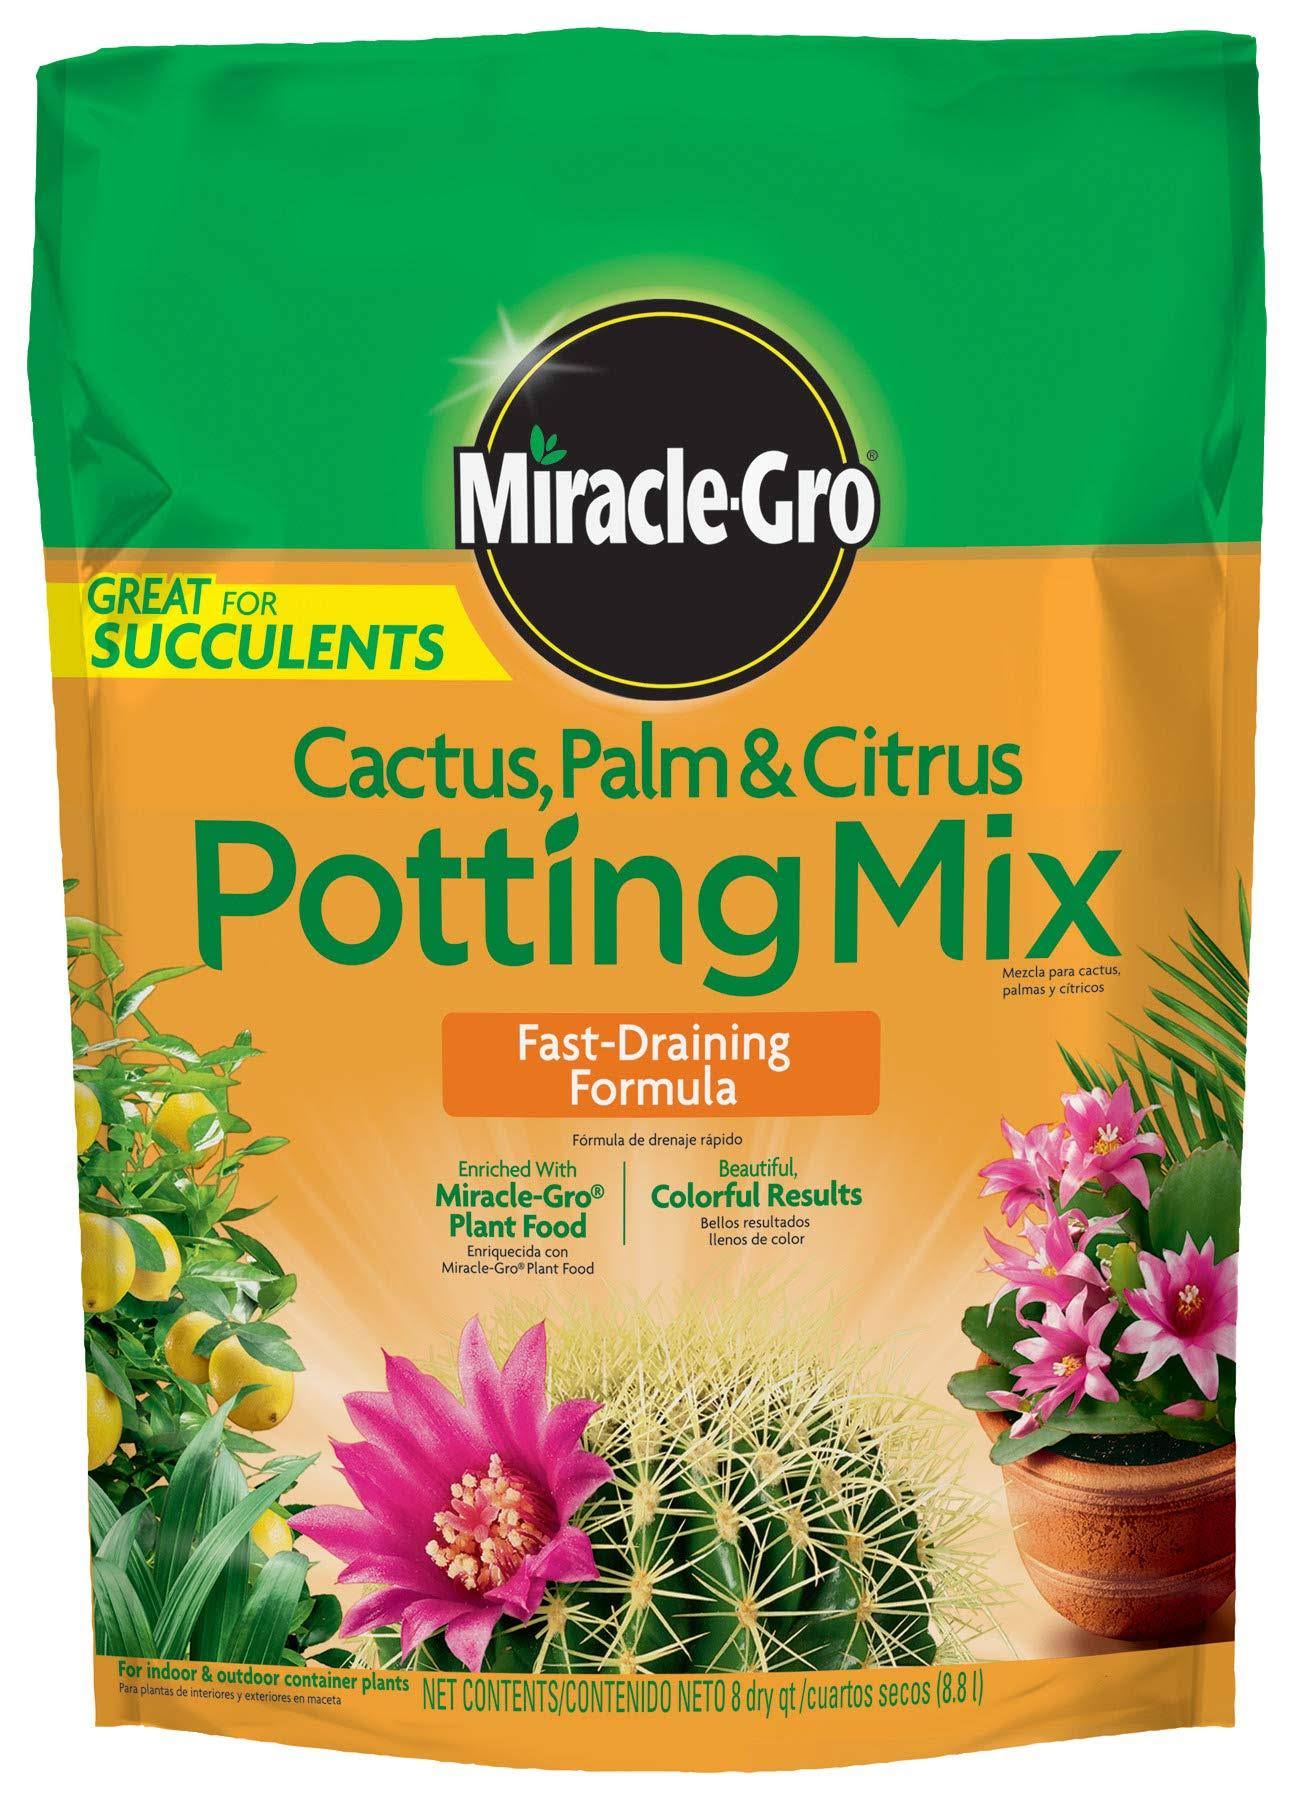 Miracle-Gro Cactus Palm and Citrus Potting Mix